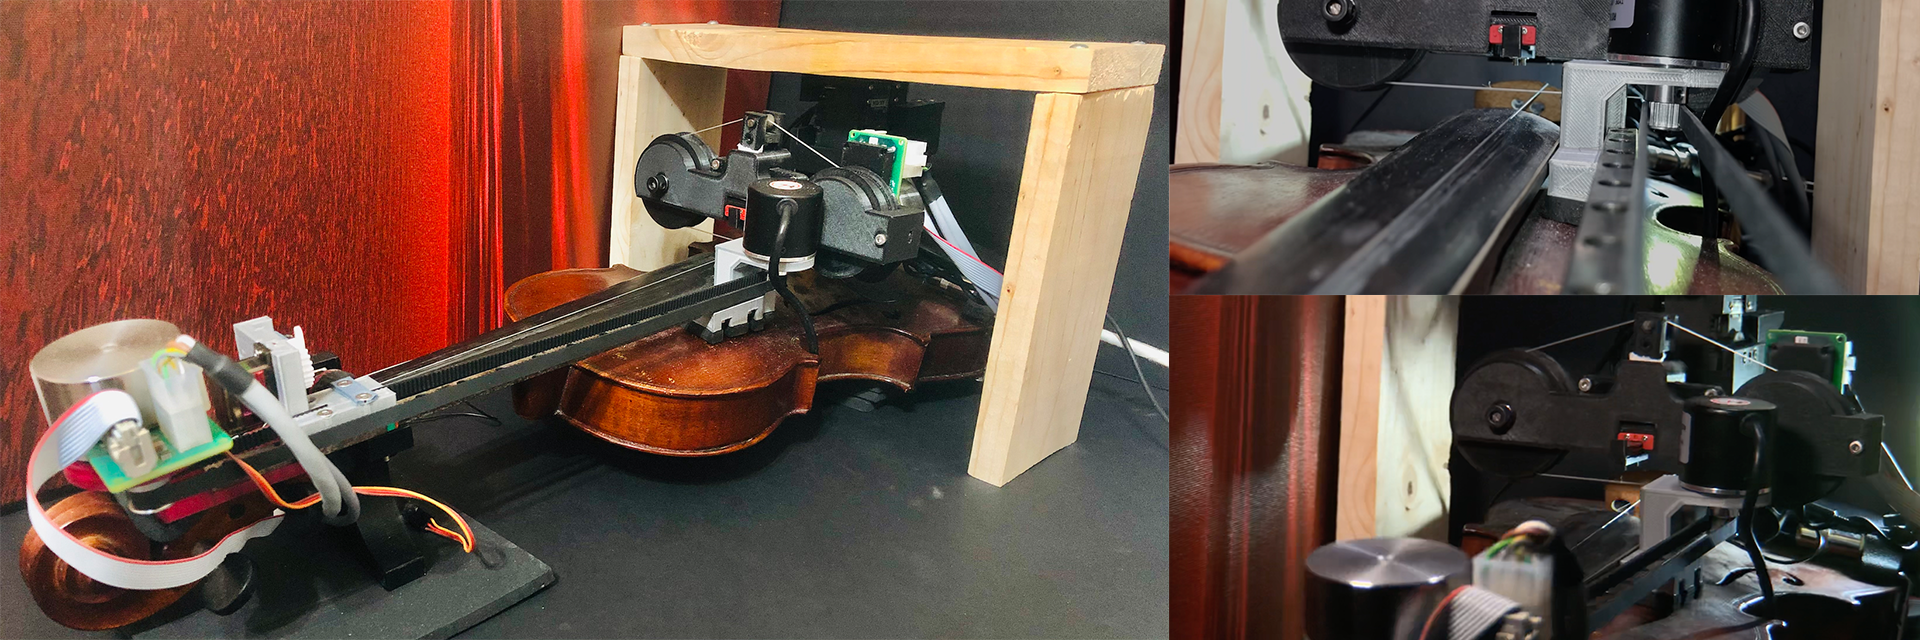 A violin rigged up for research purposes.